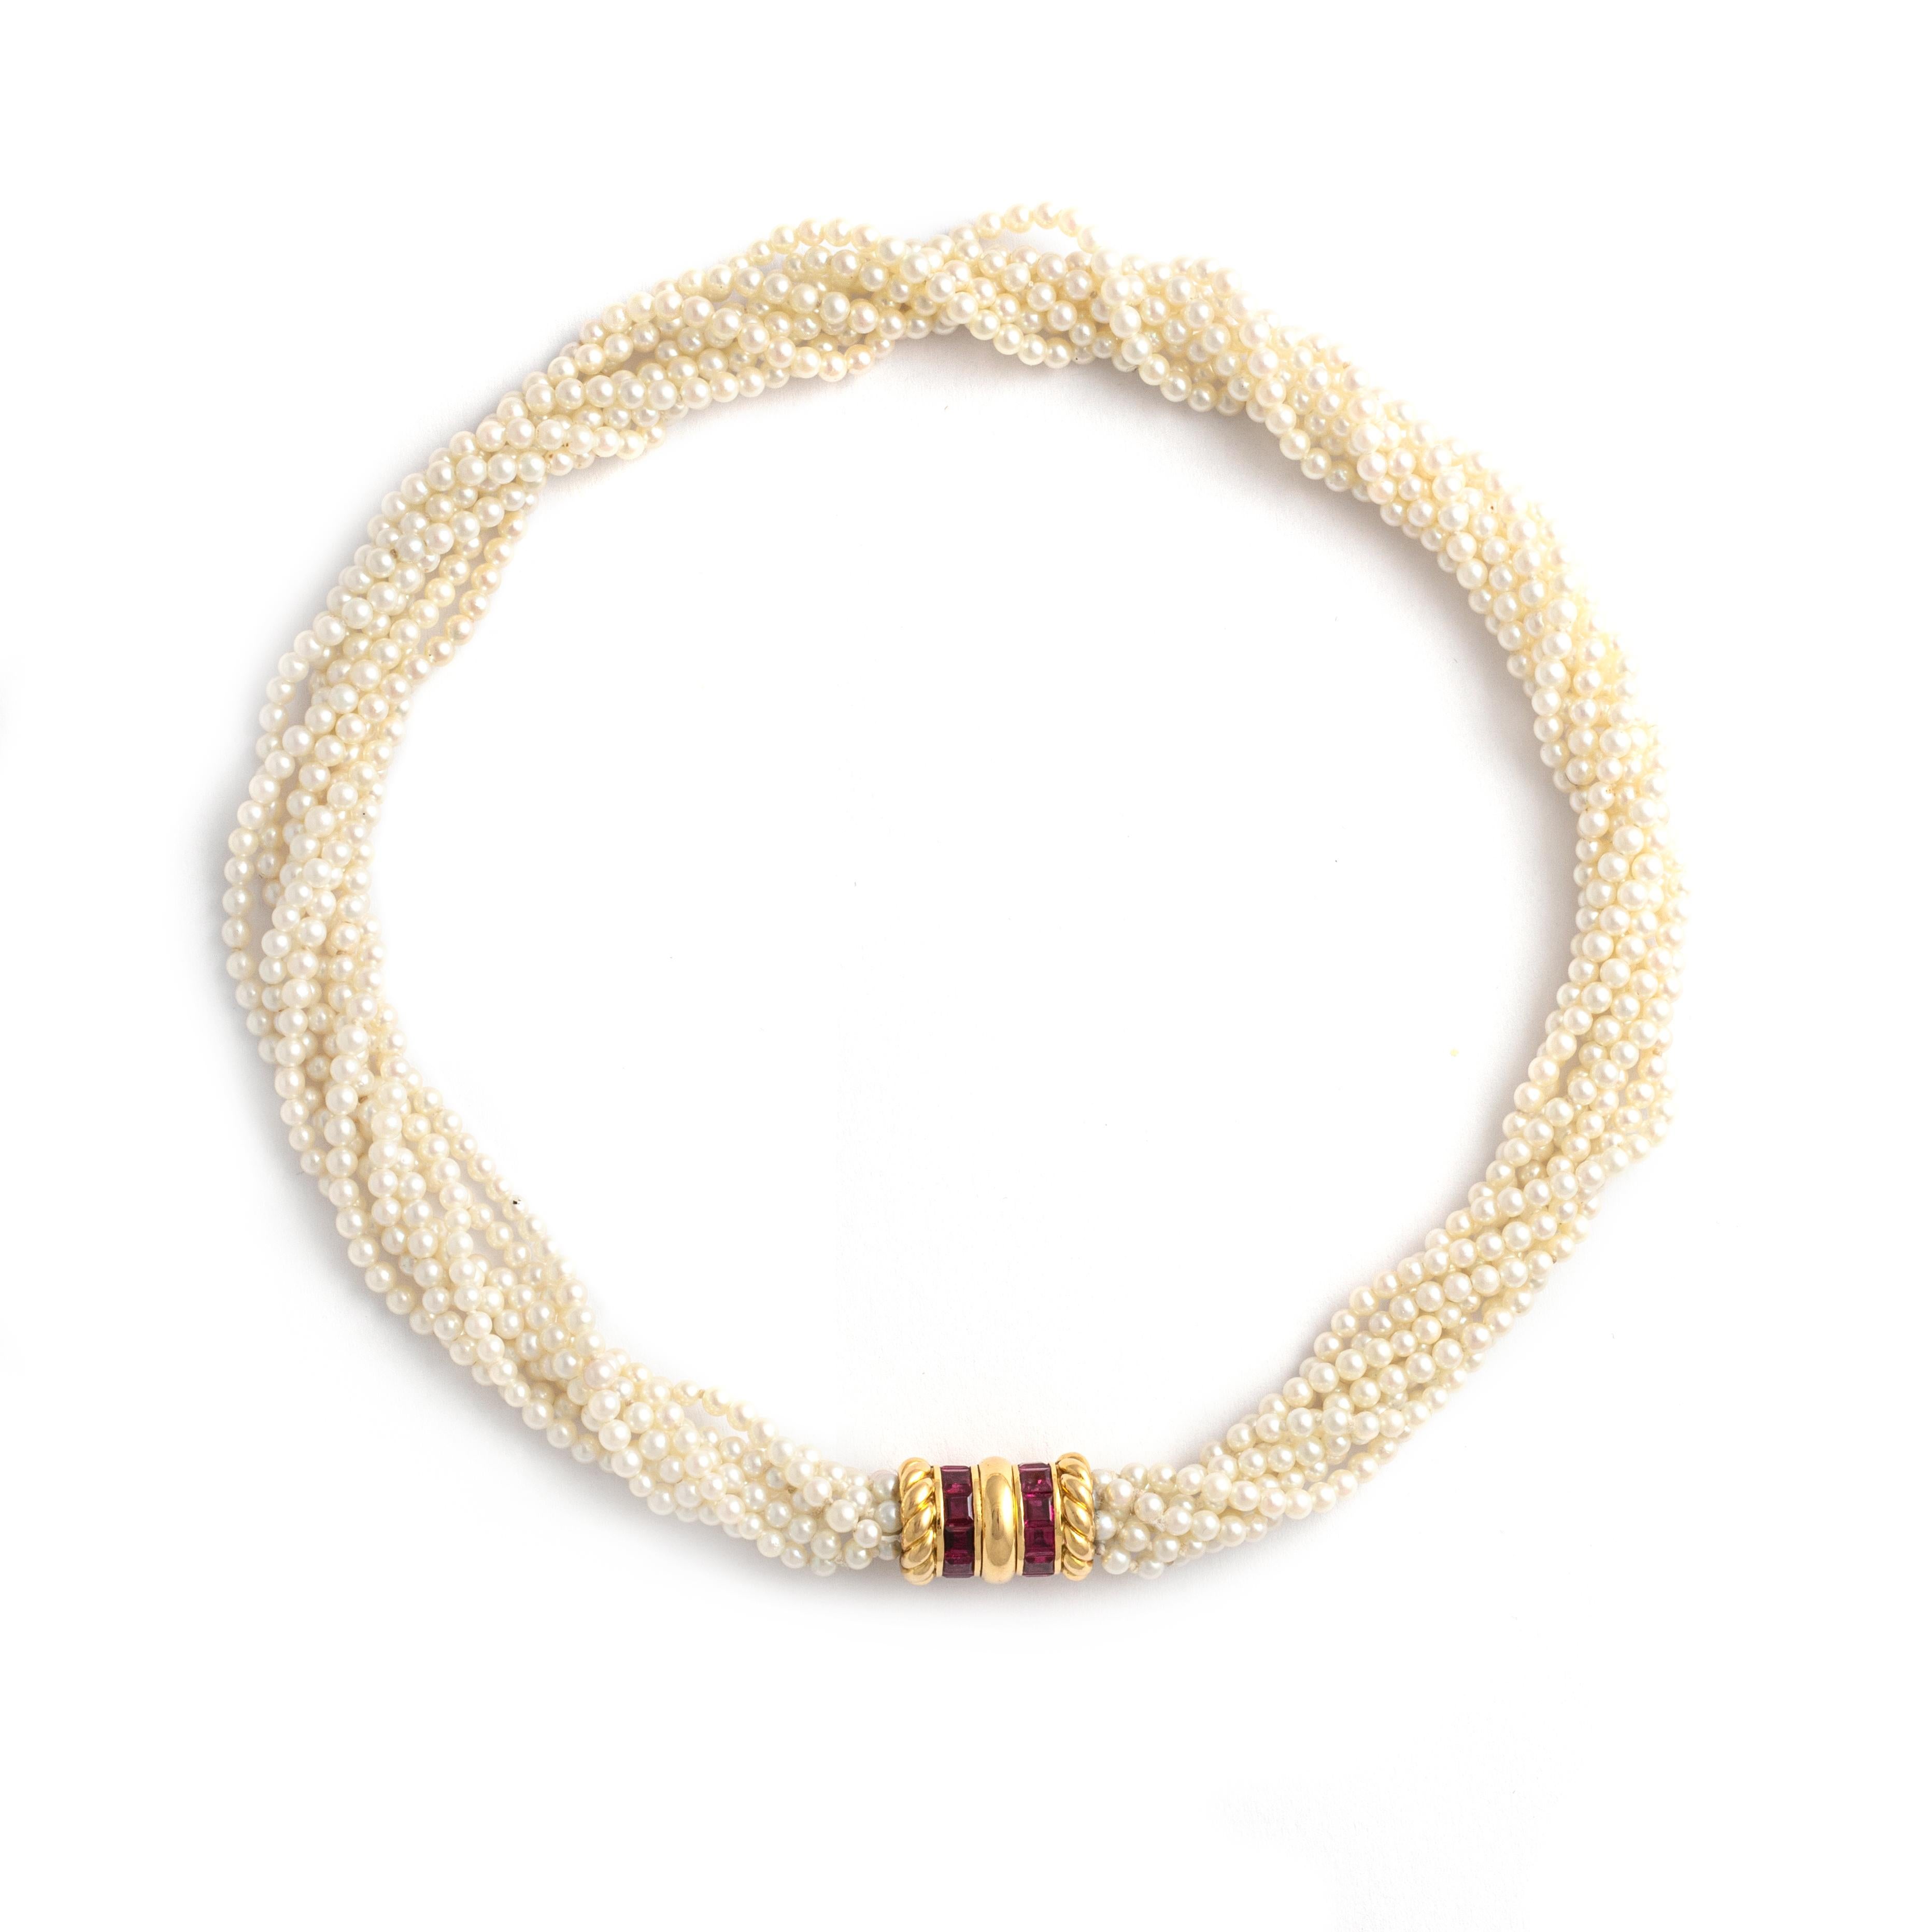 Immerse yourself in the luxurious fusion of timeless elegance and vibrant allure with this Ruby 18K Yellow Gold Pearl Necklace. Crafted with meticulous attention to detail, this statement piece features six strands of cultured pearls, each strand